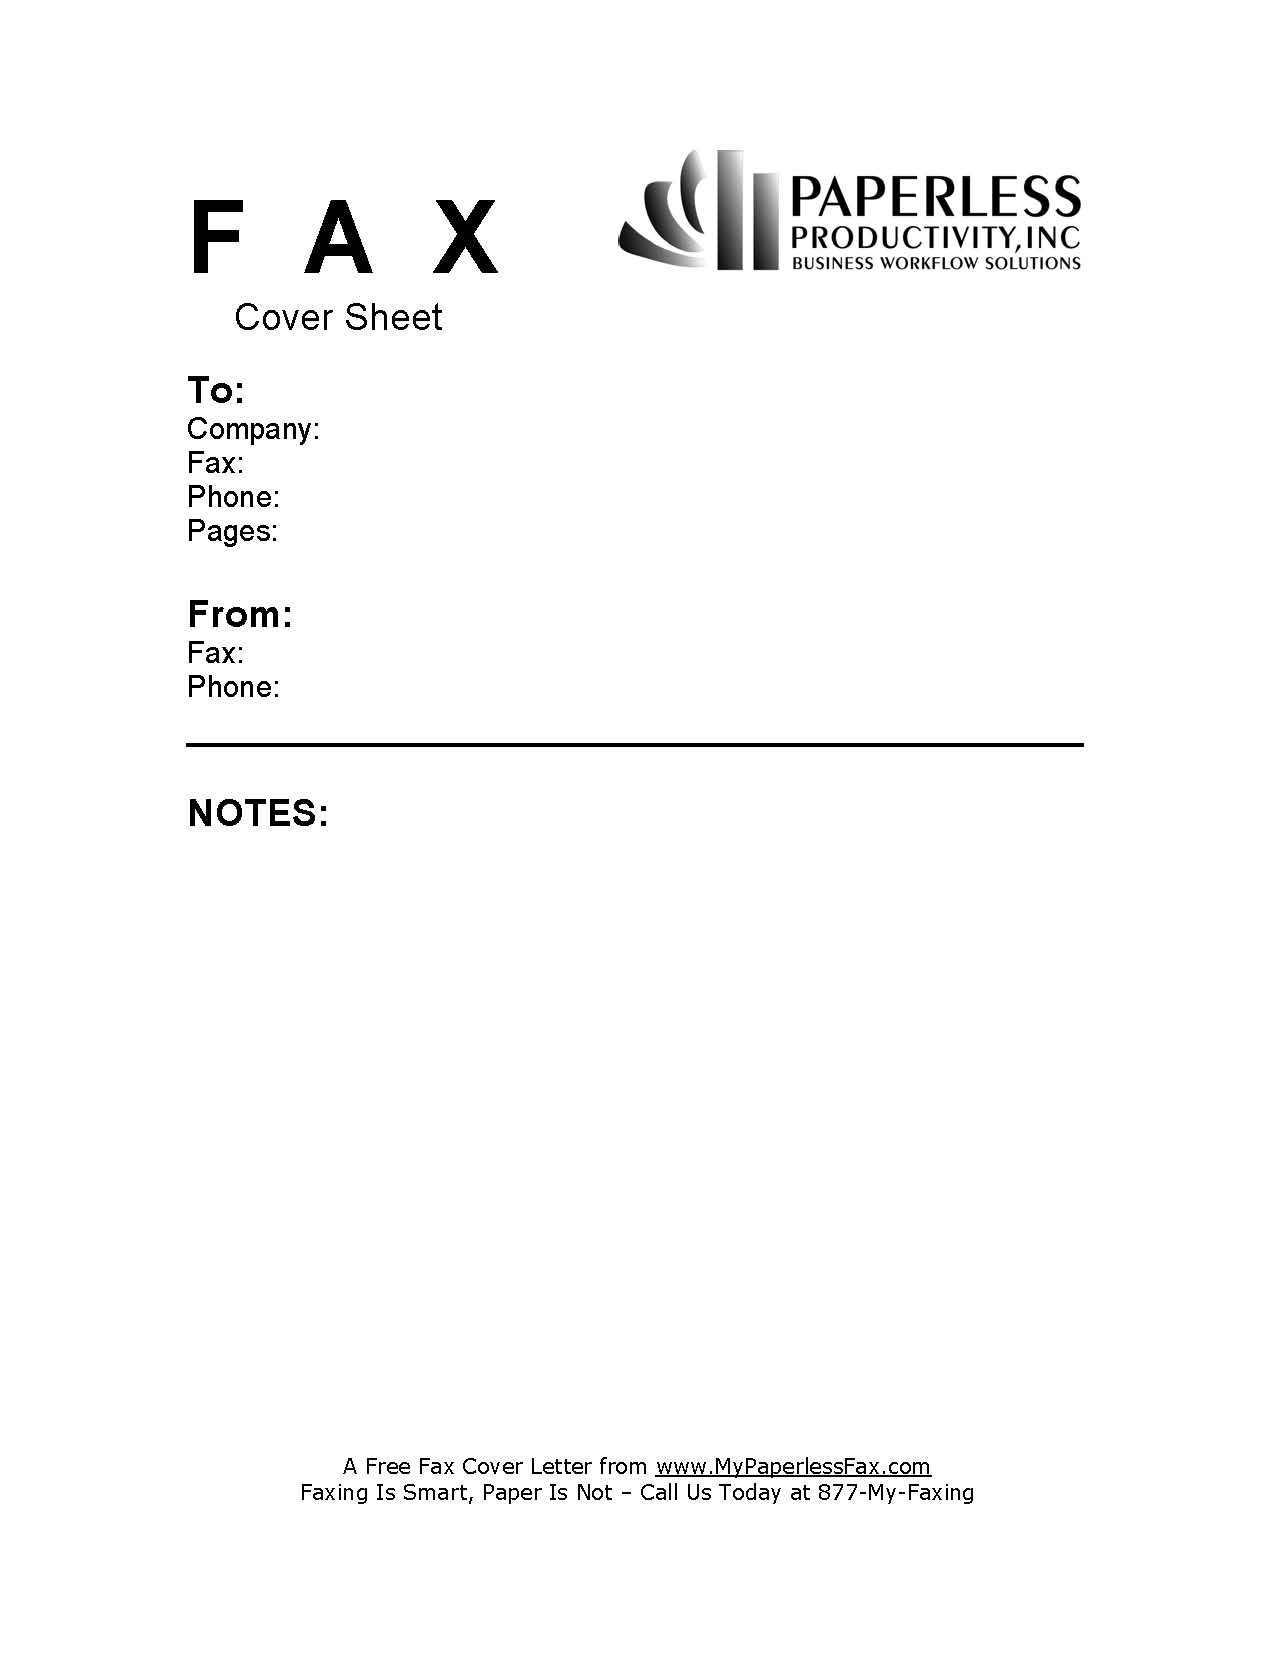 Business Fax Cover Sheet Template